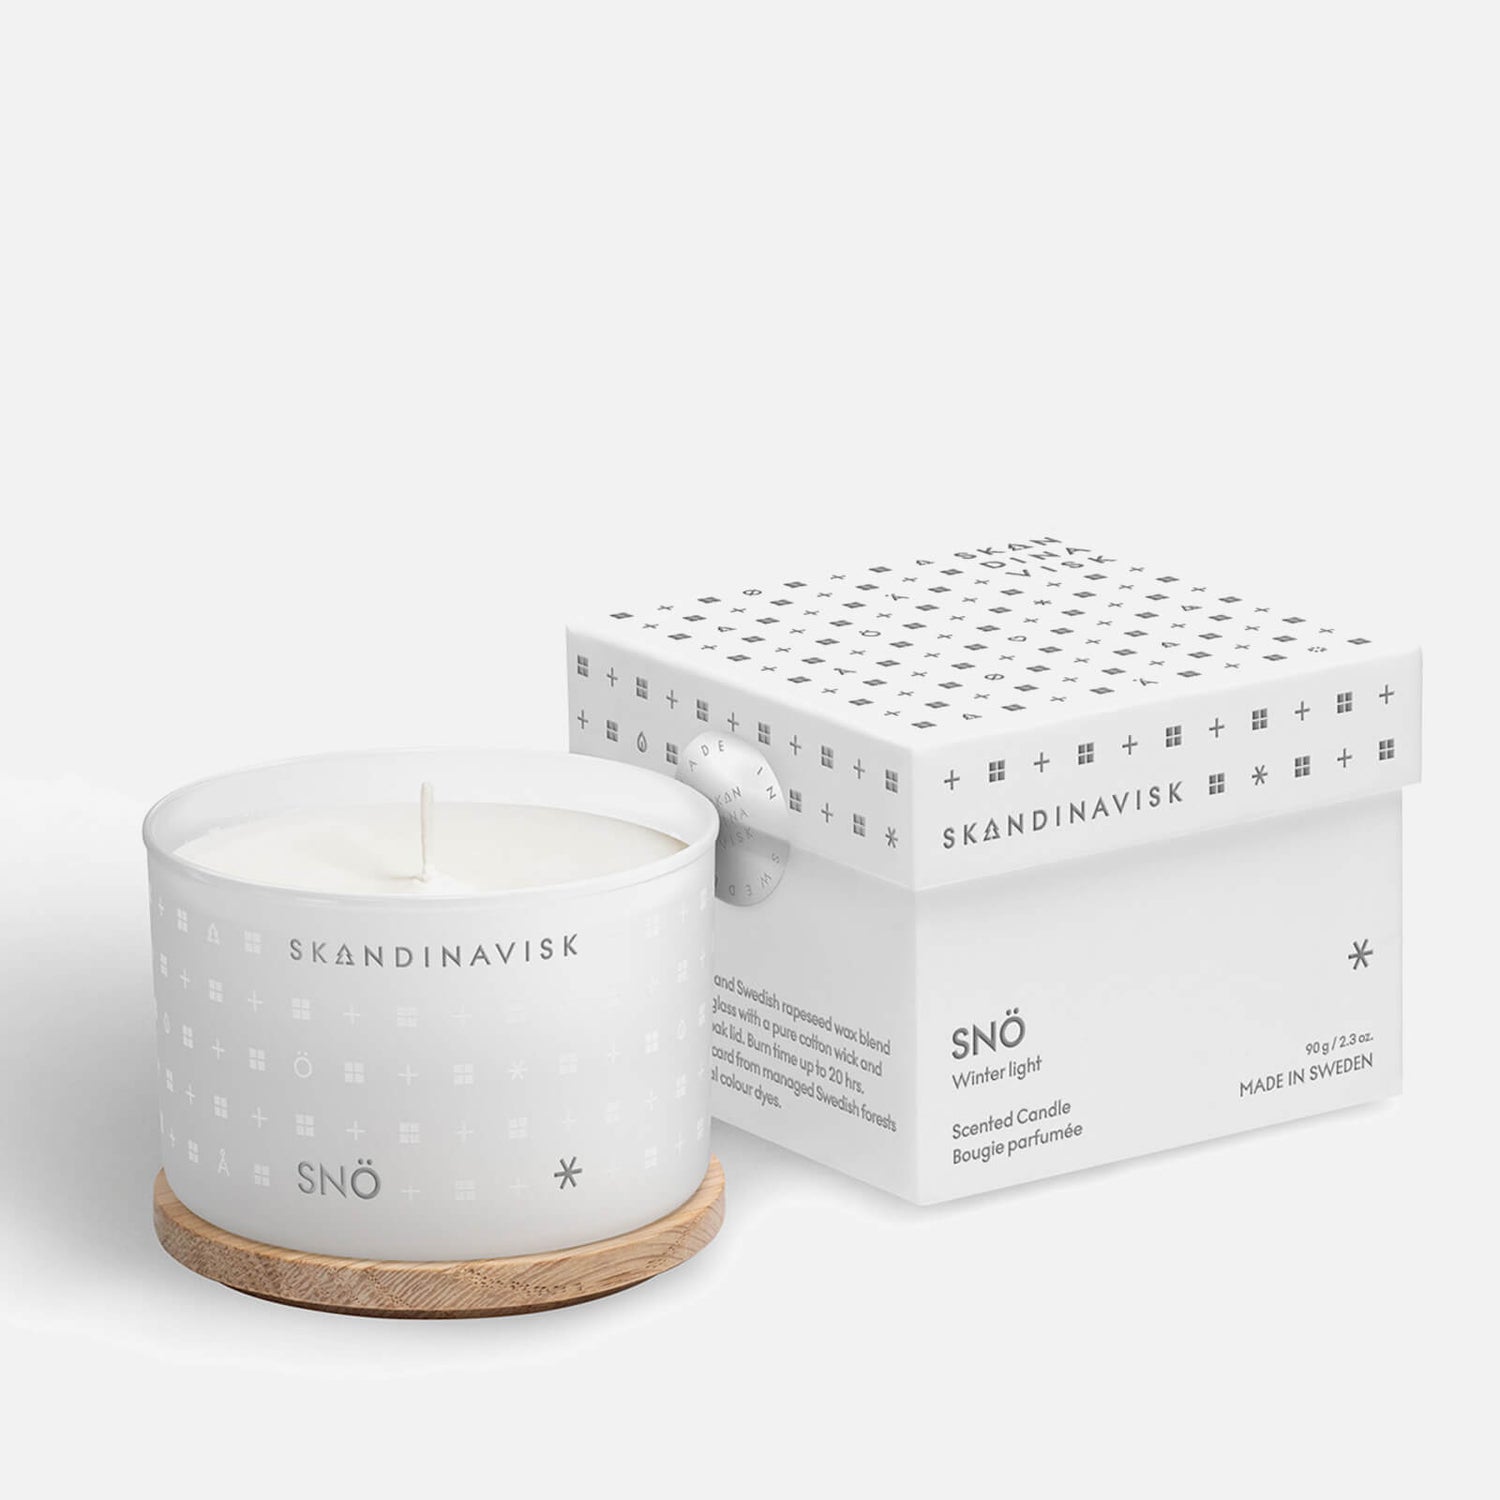 SKANDINAVISK Scented Candle - Clear Glass - Sno - 90g